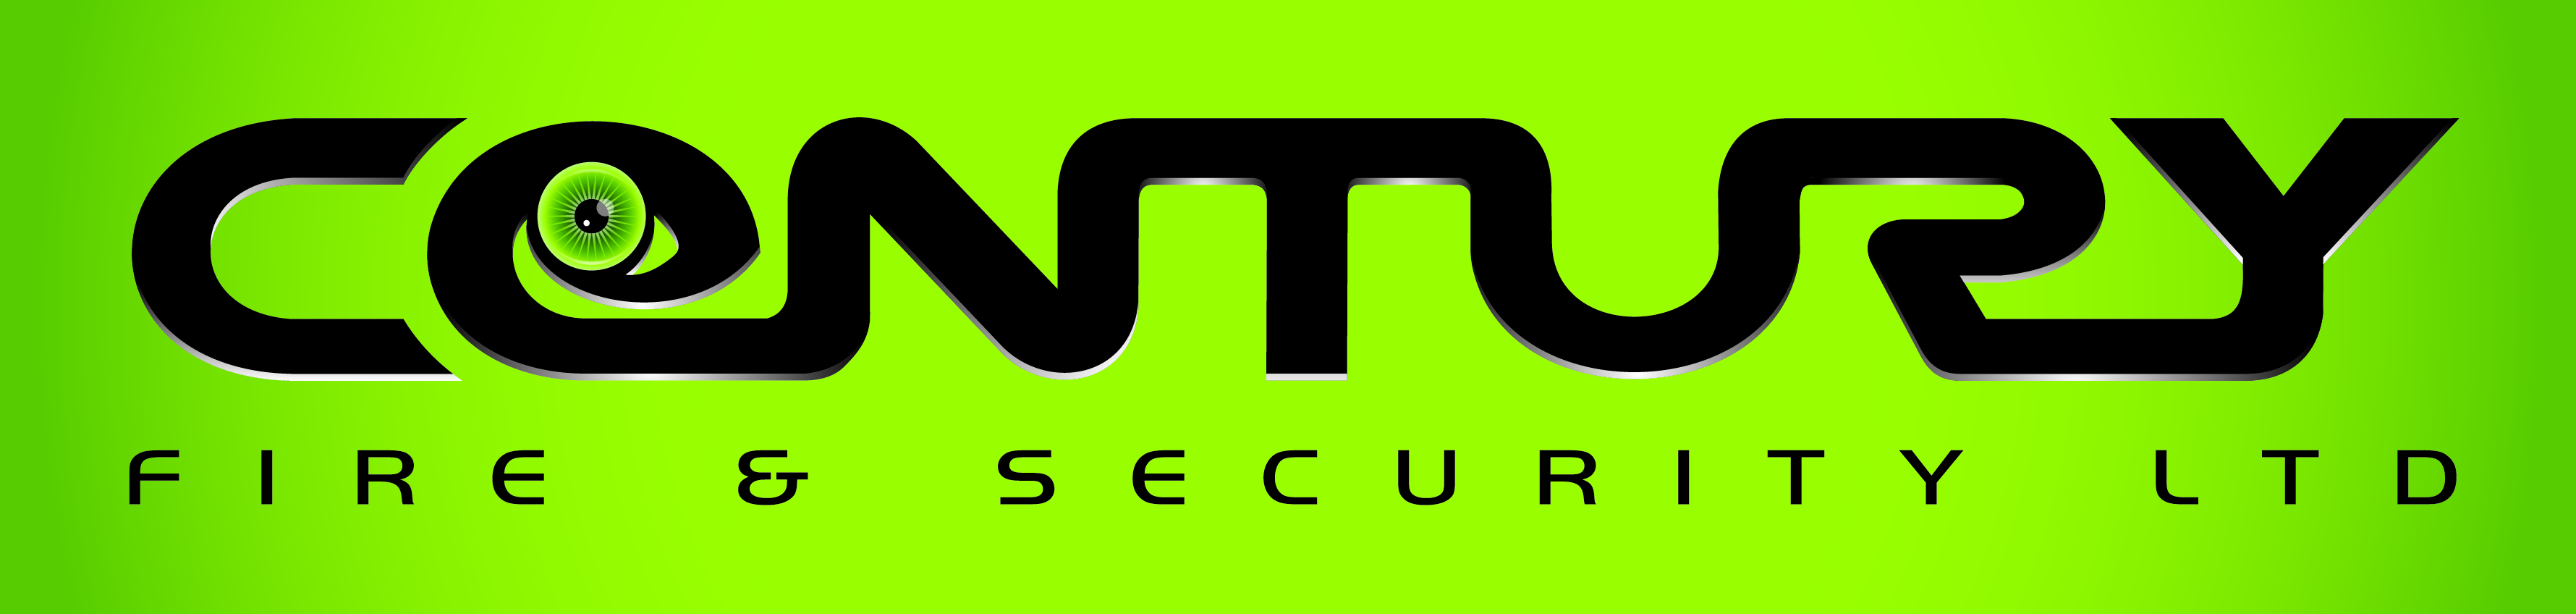 Company Logo For Century Fire and Security'